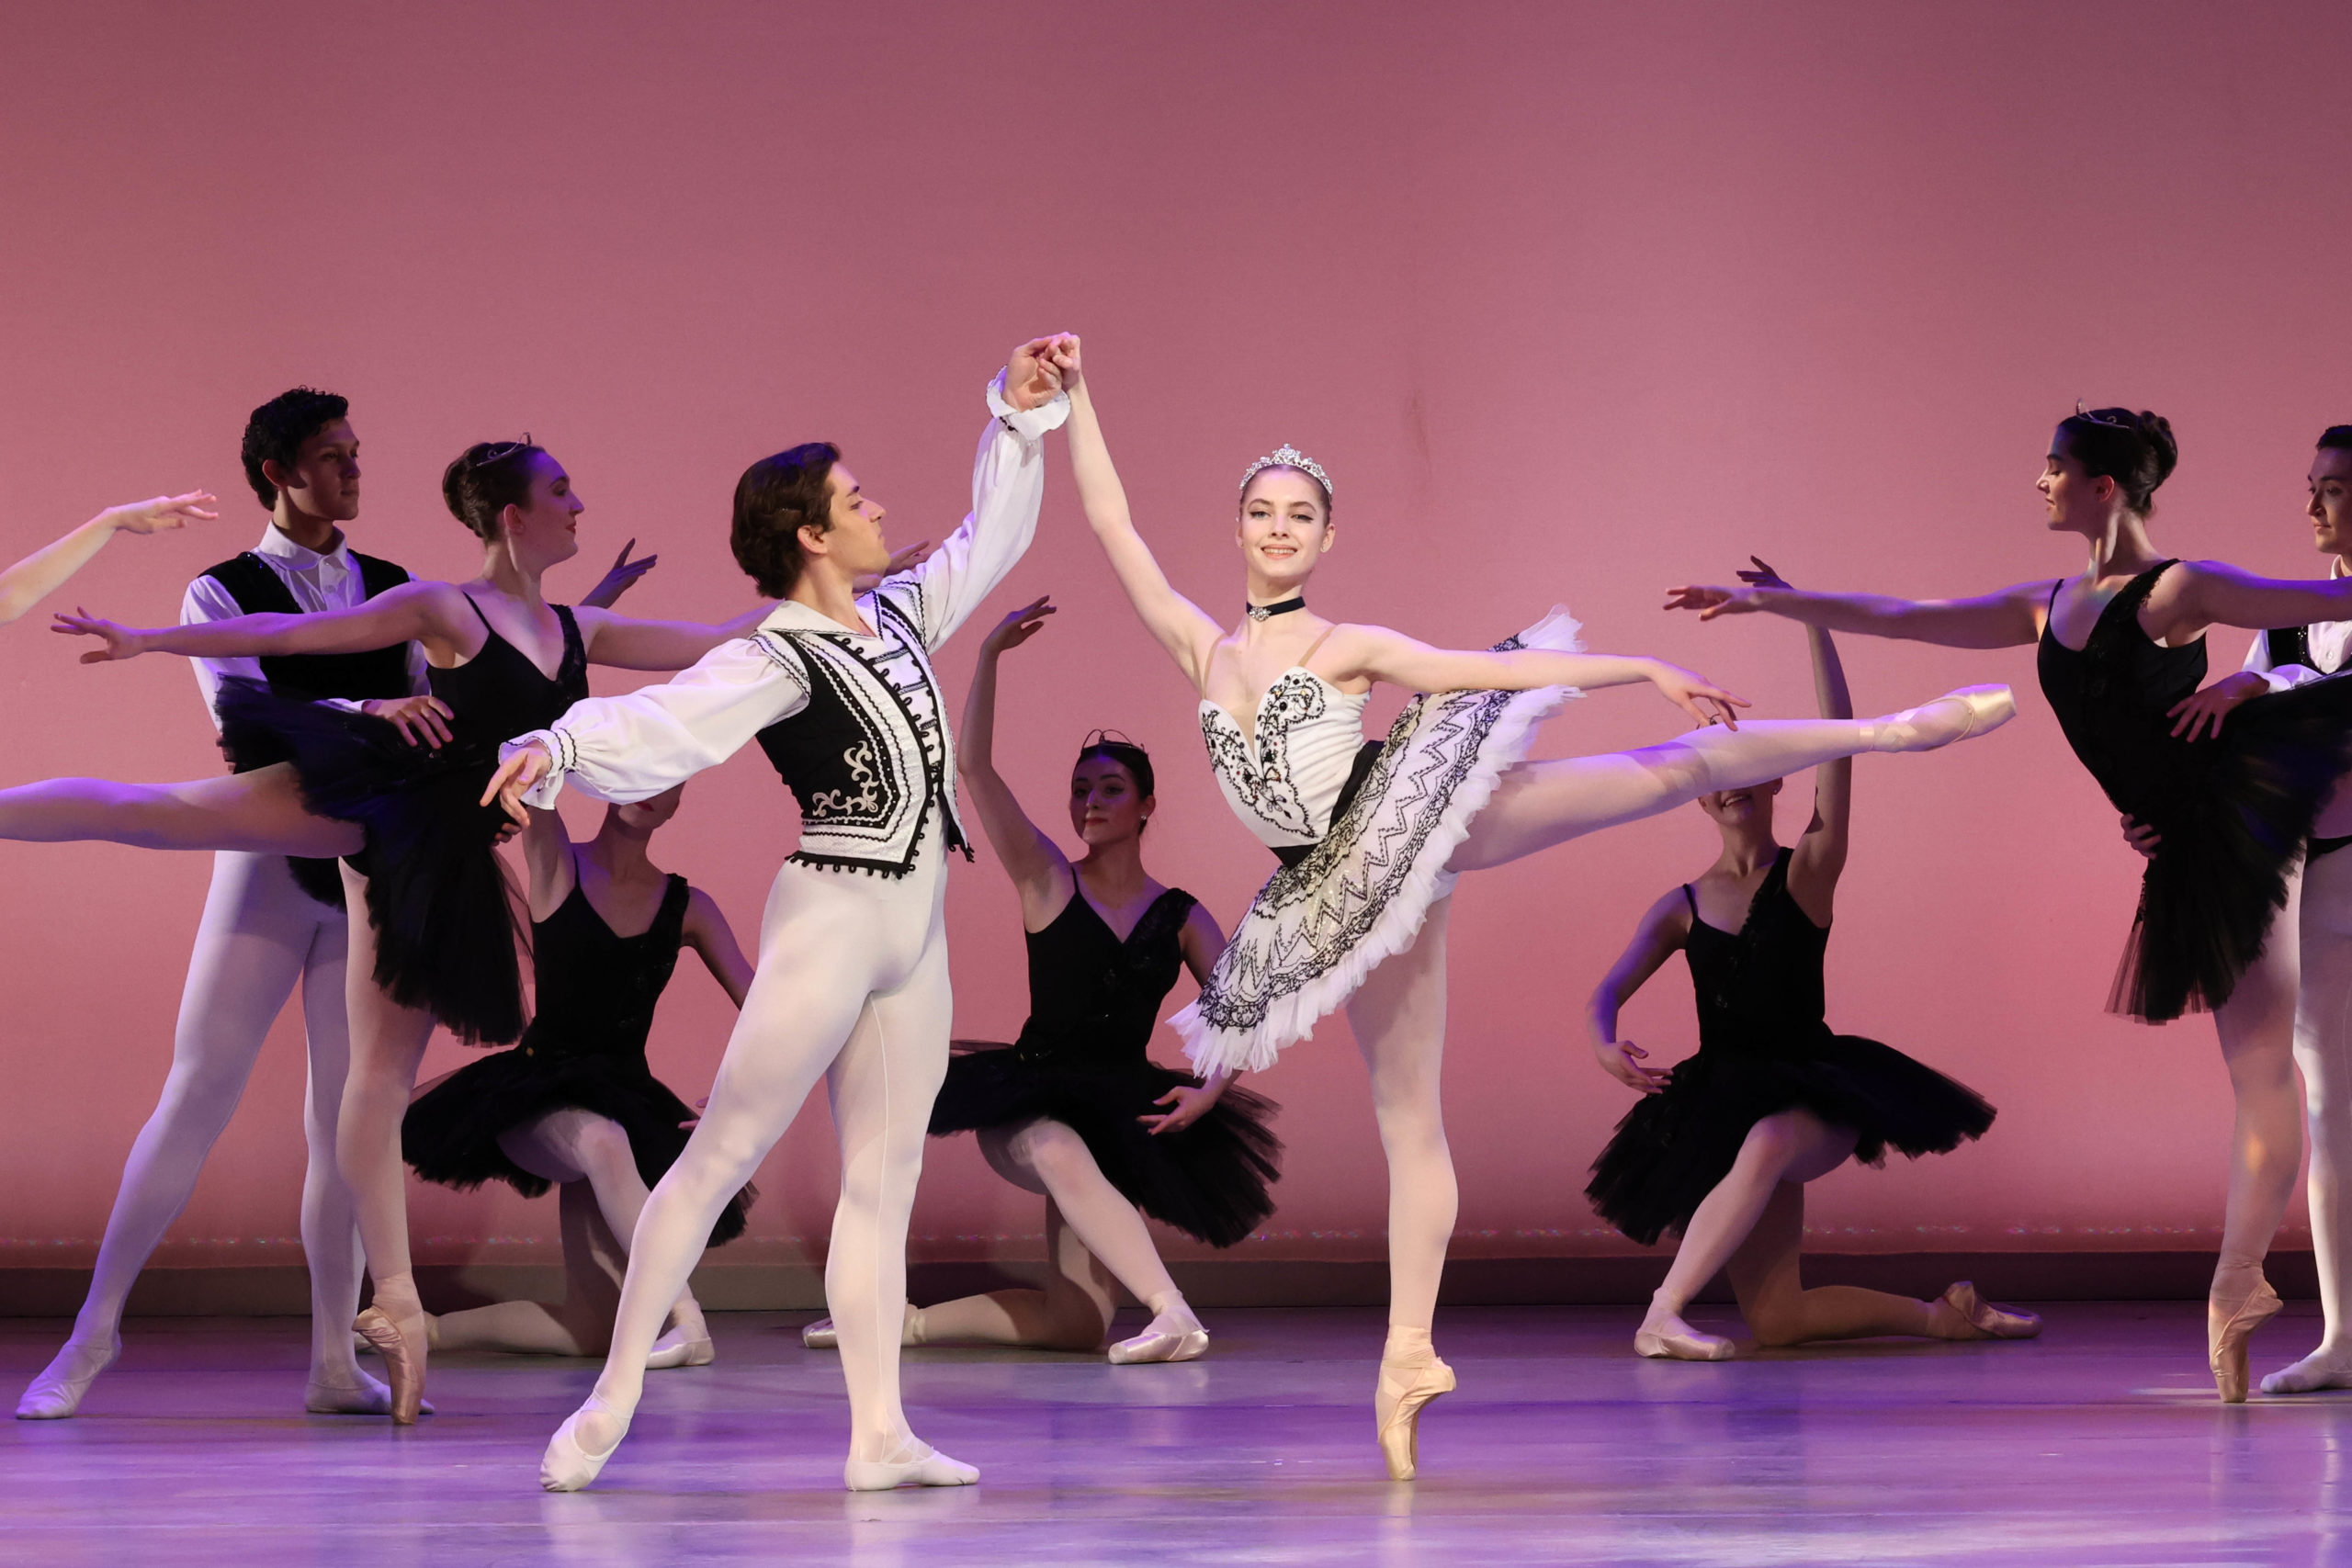 A performance photo of a young male holding a young woman's hand as she balances in arabesque on pointe.